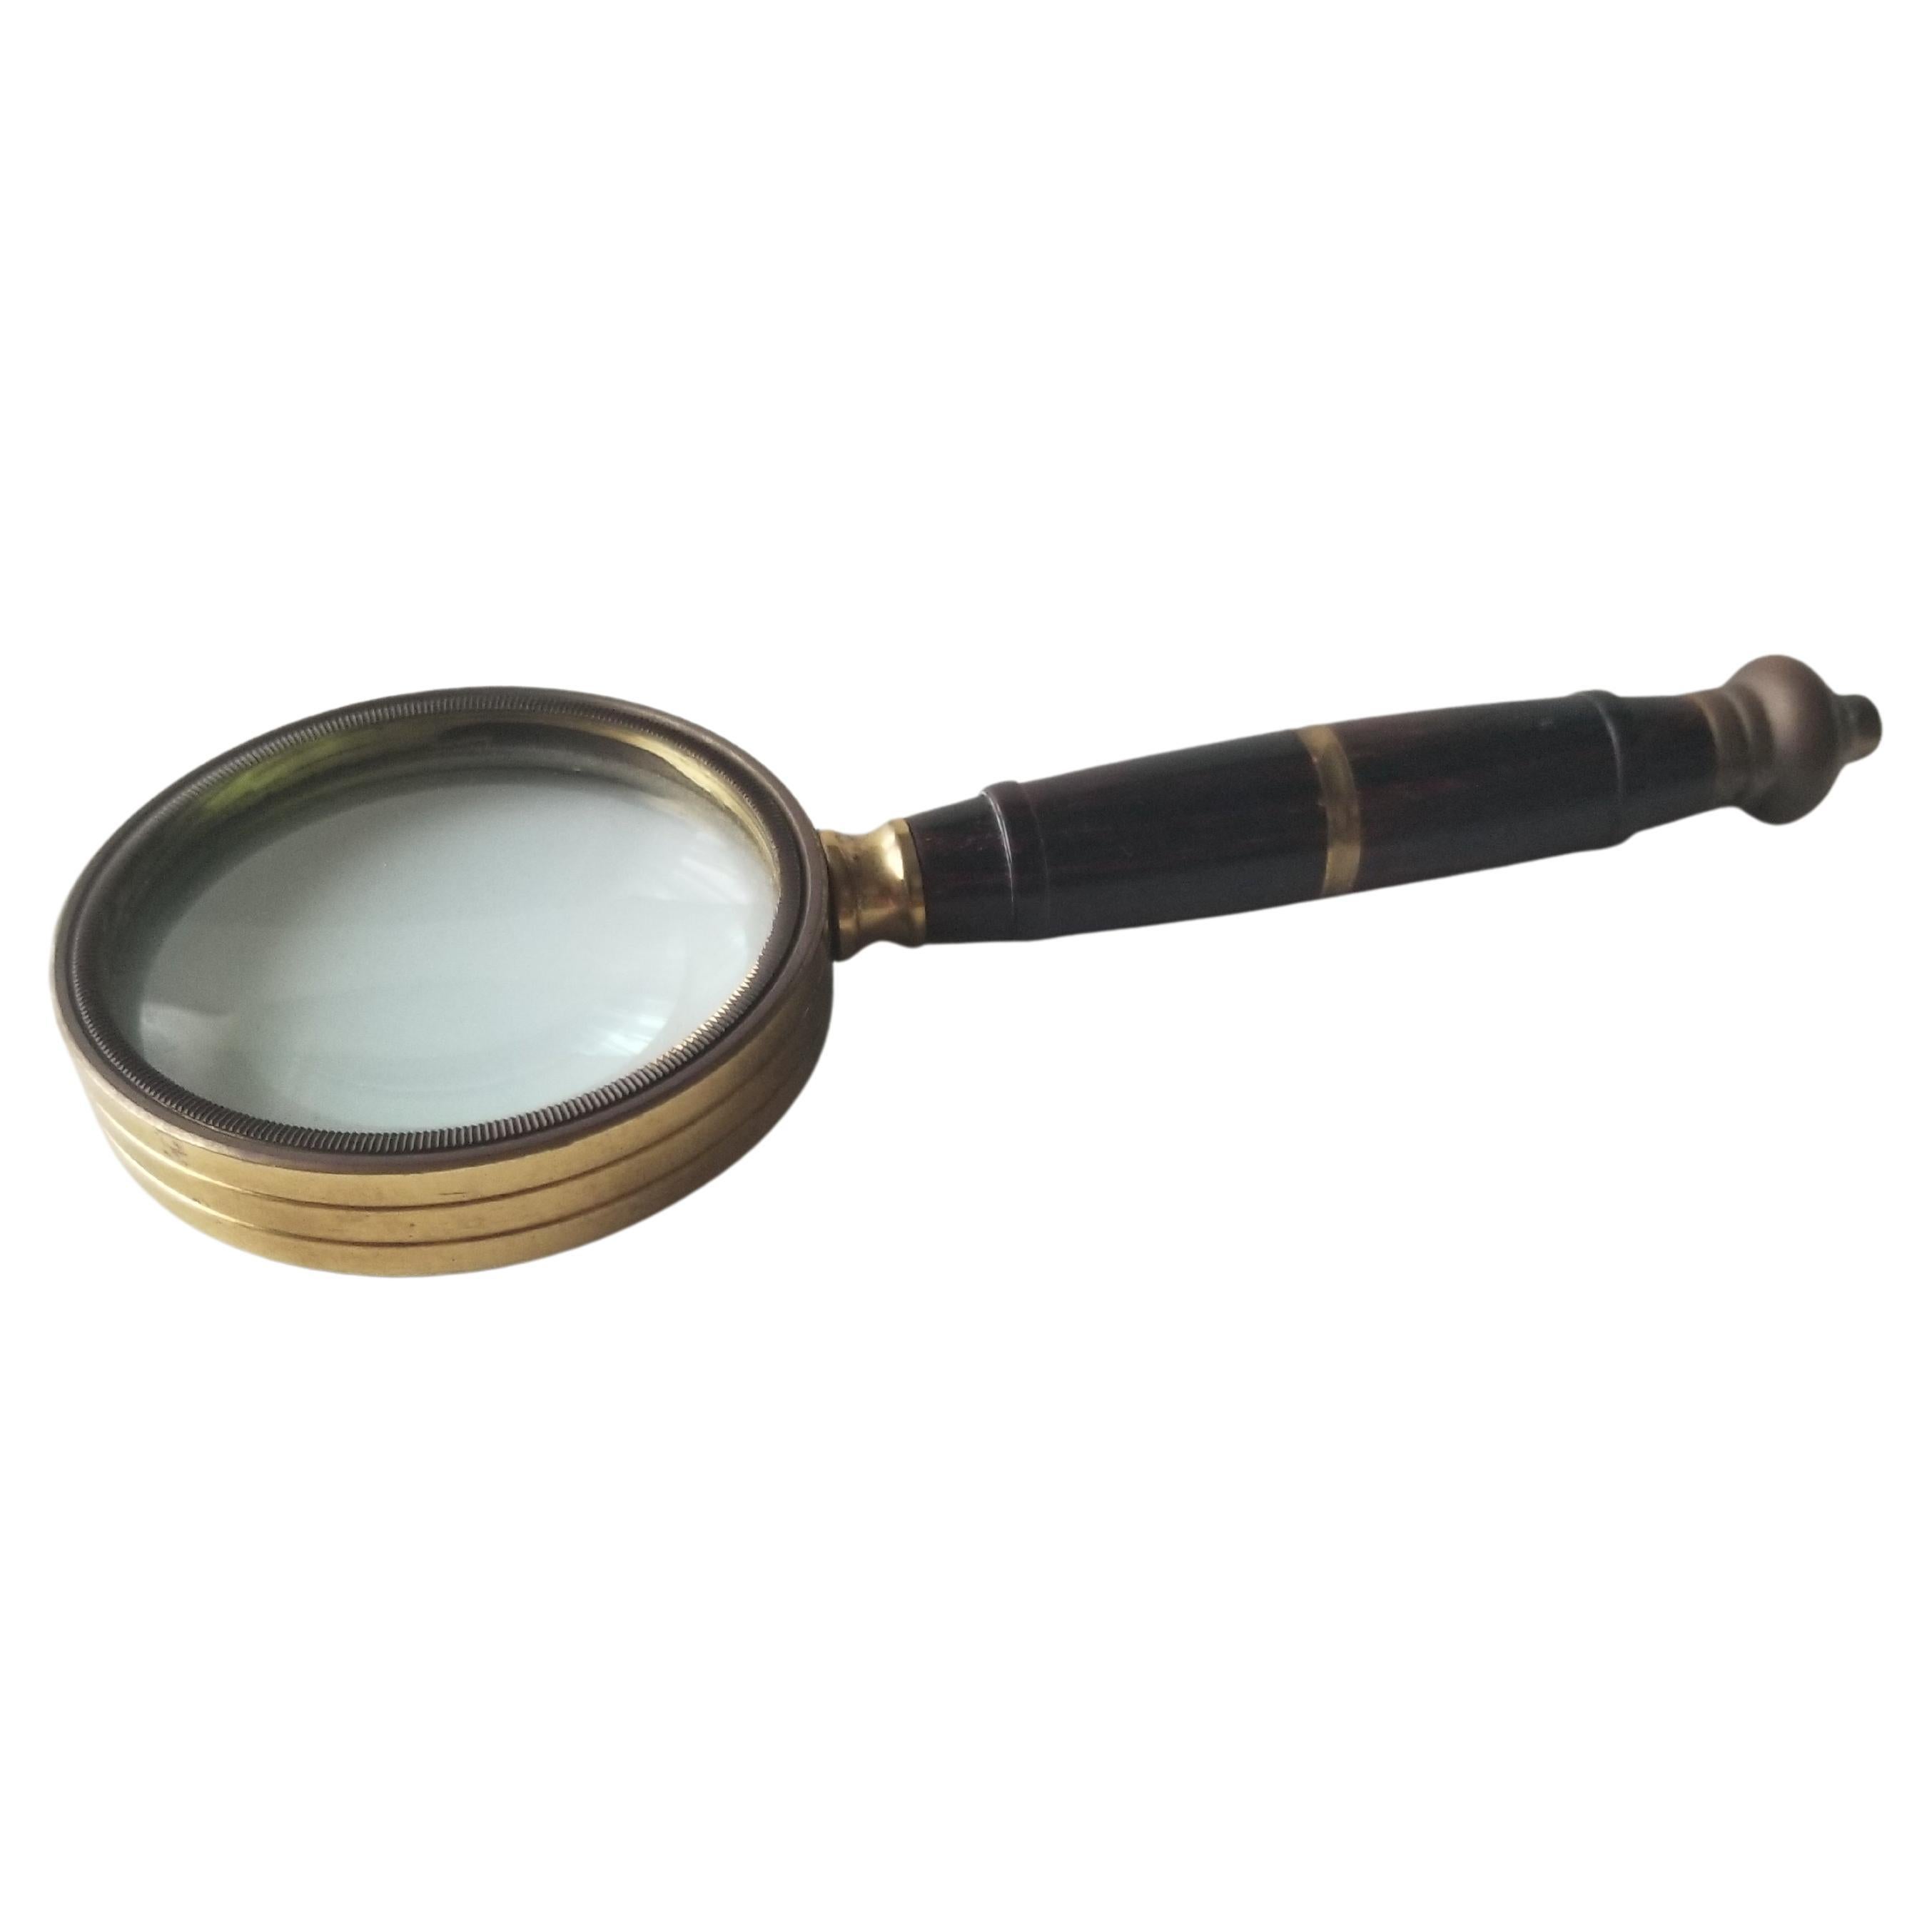 Magnifying Glass Petite
Lovely Petite Magnifying Glass Antique Vintage Braided Sculptural Brass with Wood Finish 
Measures: 5.5 L x 2 W x .5 thick
Preowned original unrestored vintage condition.
Refer to images provided.